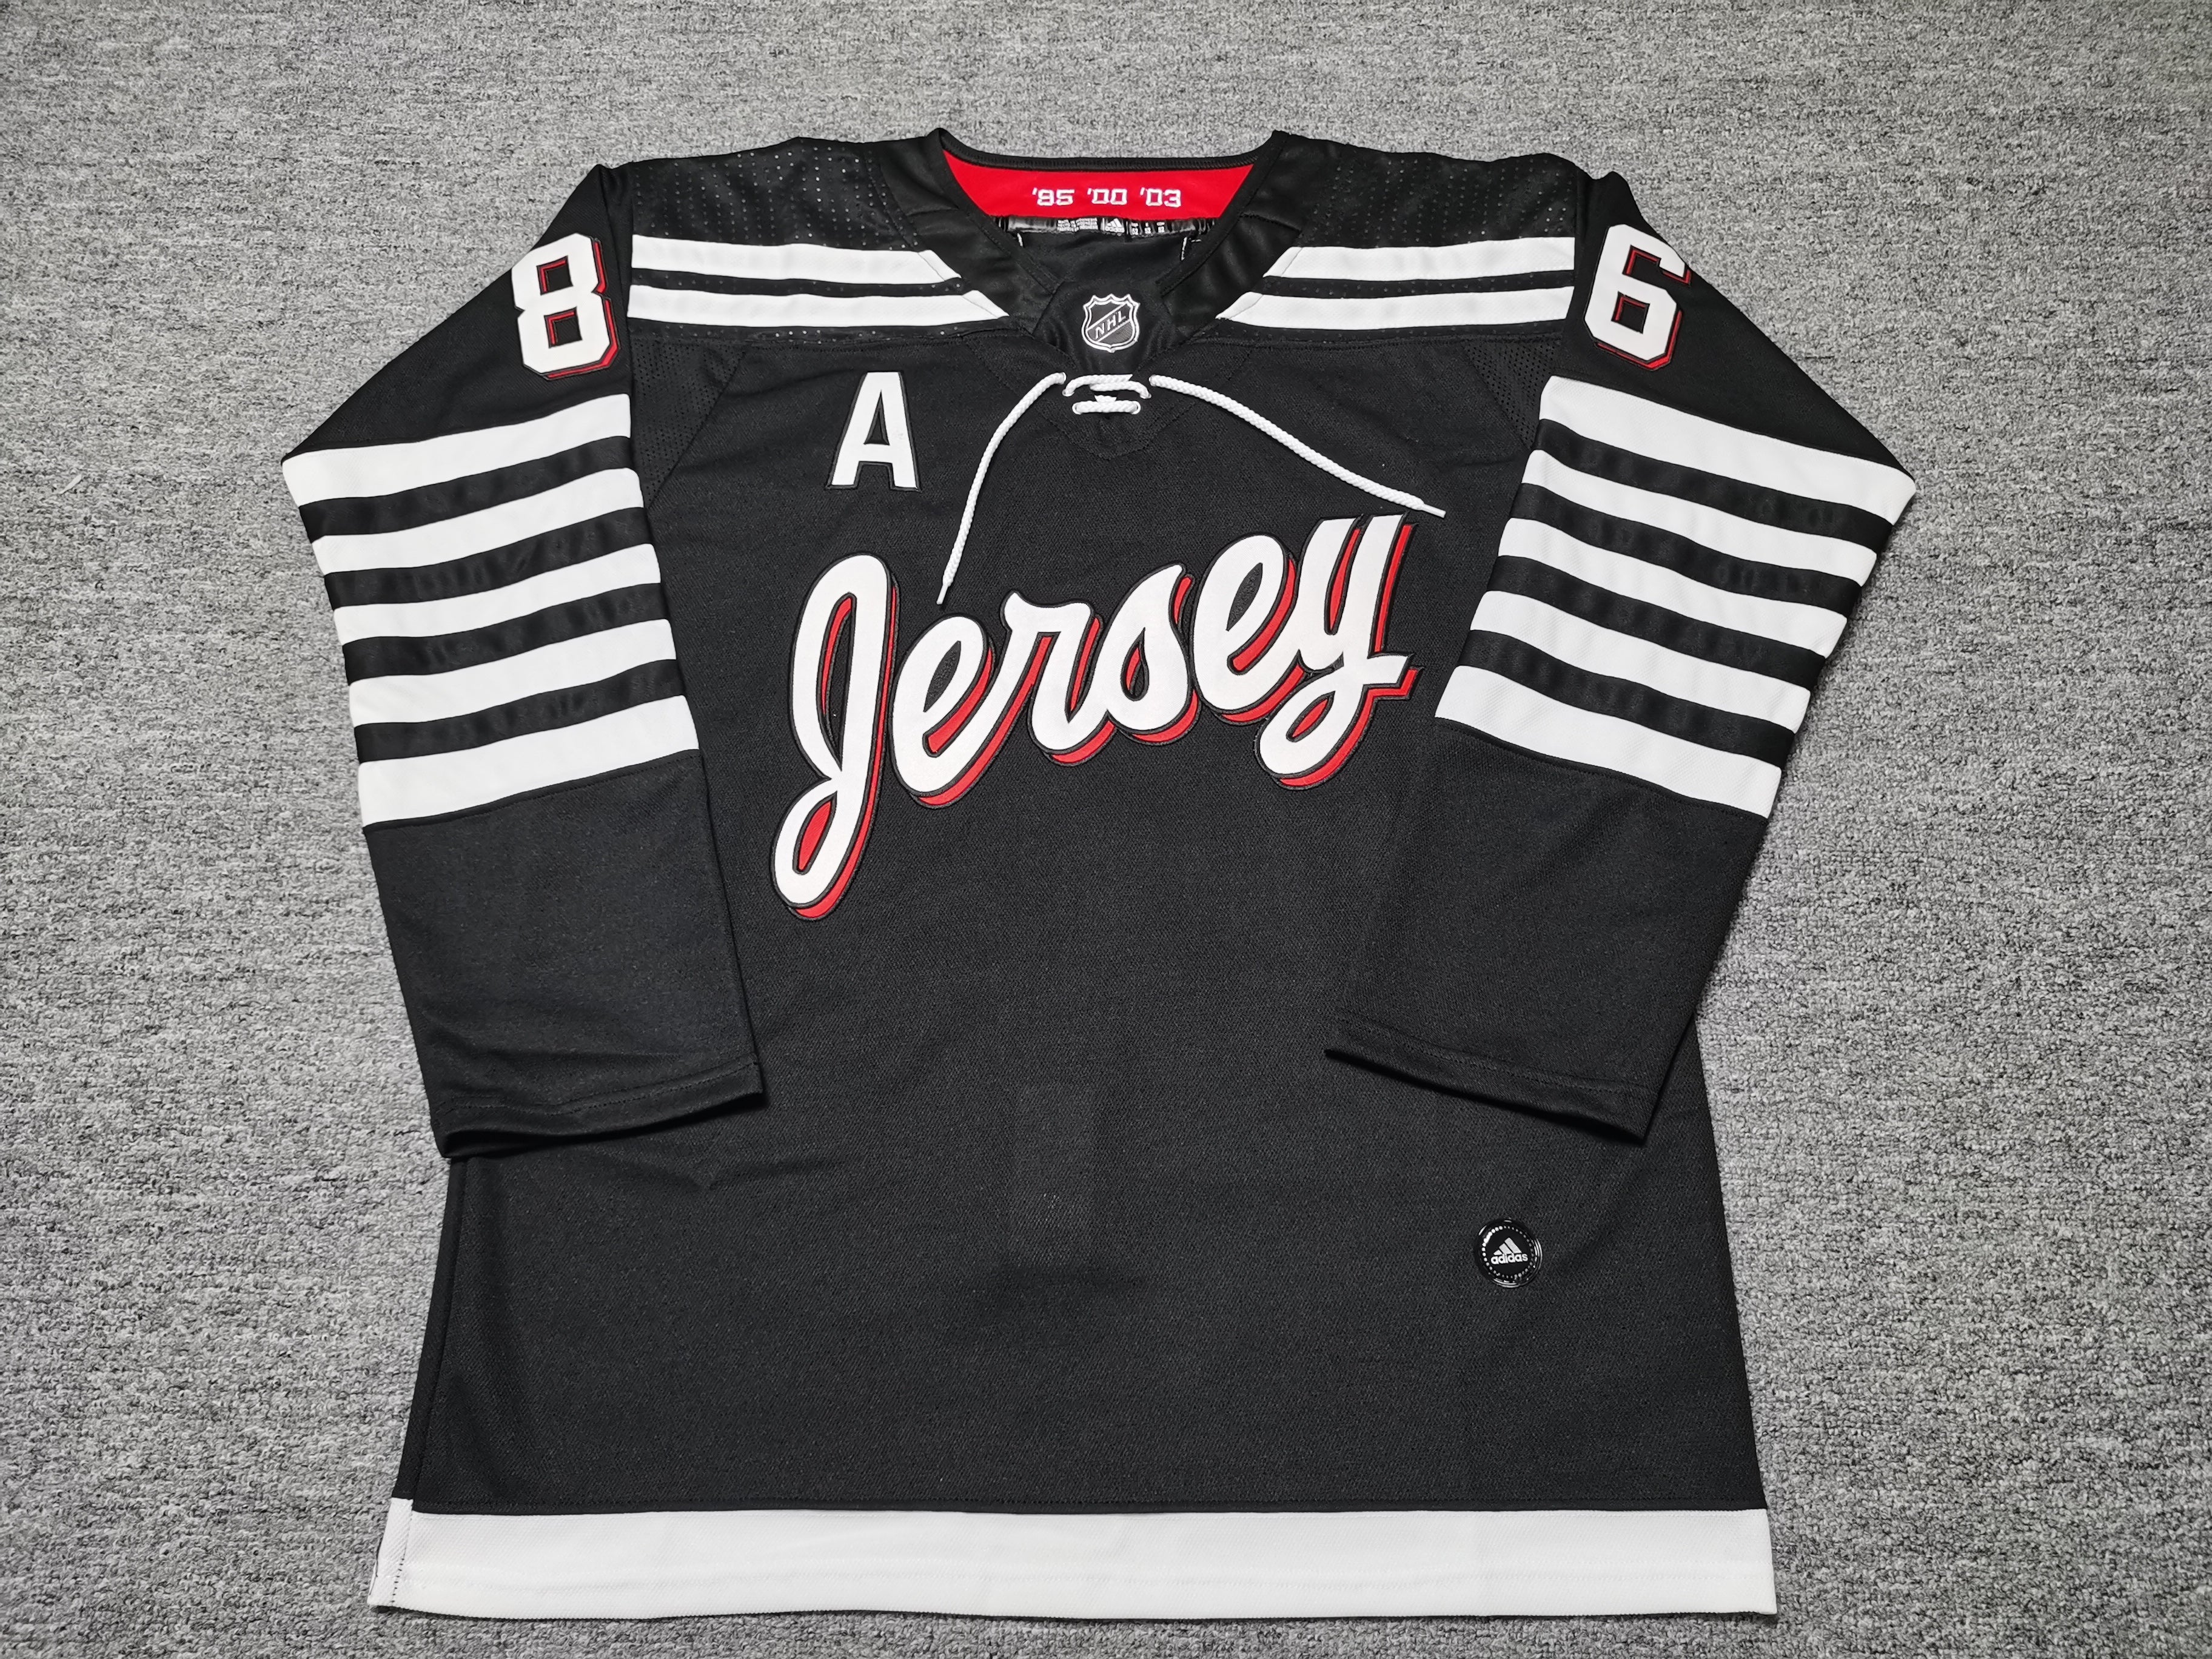 New Jersey Devils HUGHES Size 54 Adult Unisex Adidas Jersey